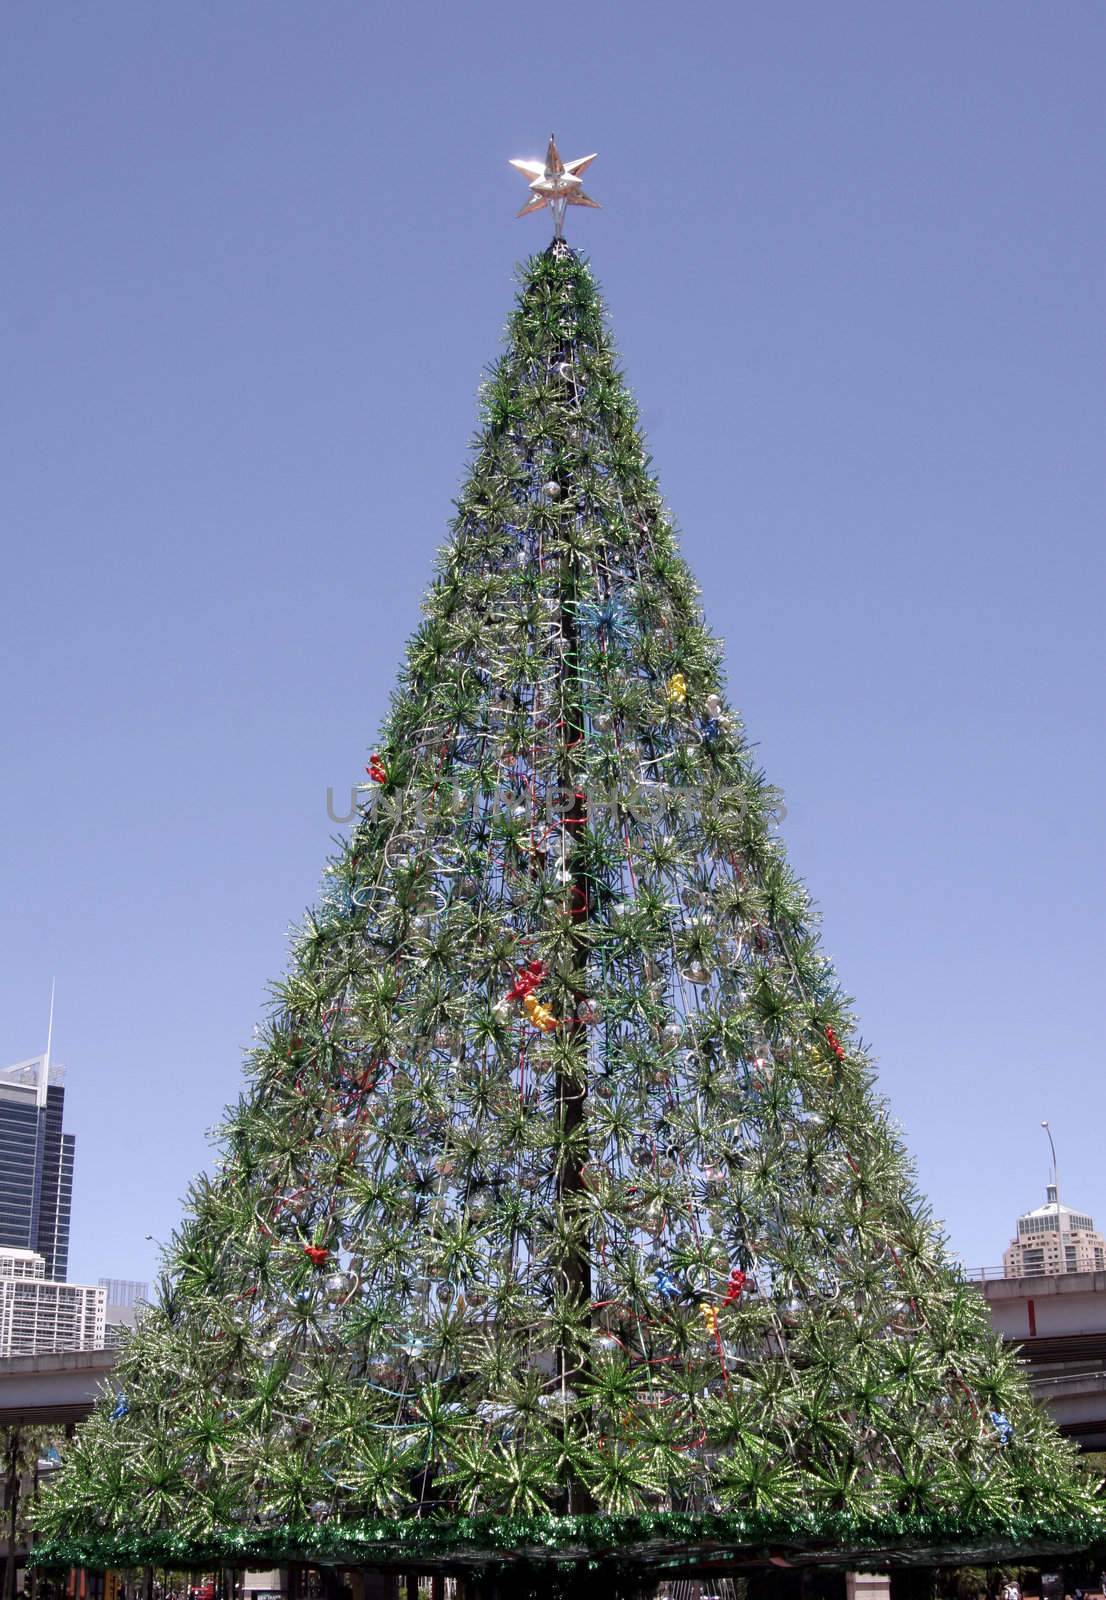 Tall Outdoor Christmas Tree With Decoration, Summer in Sydney, Australia